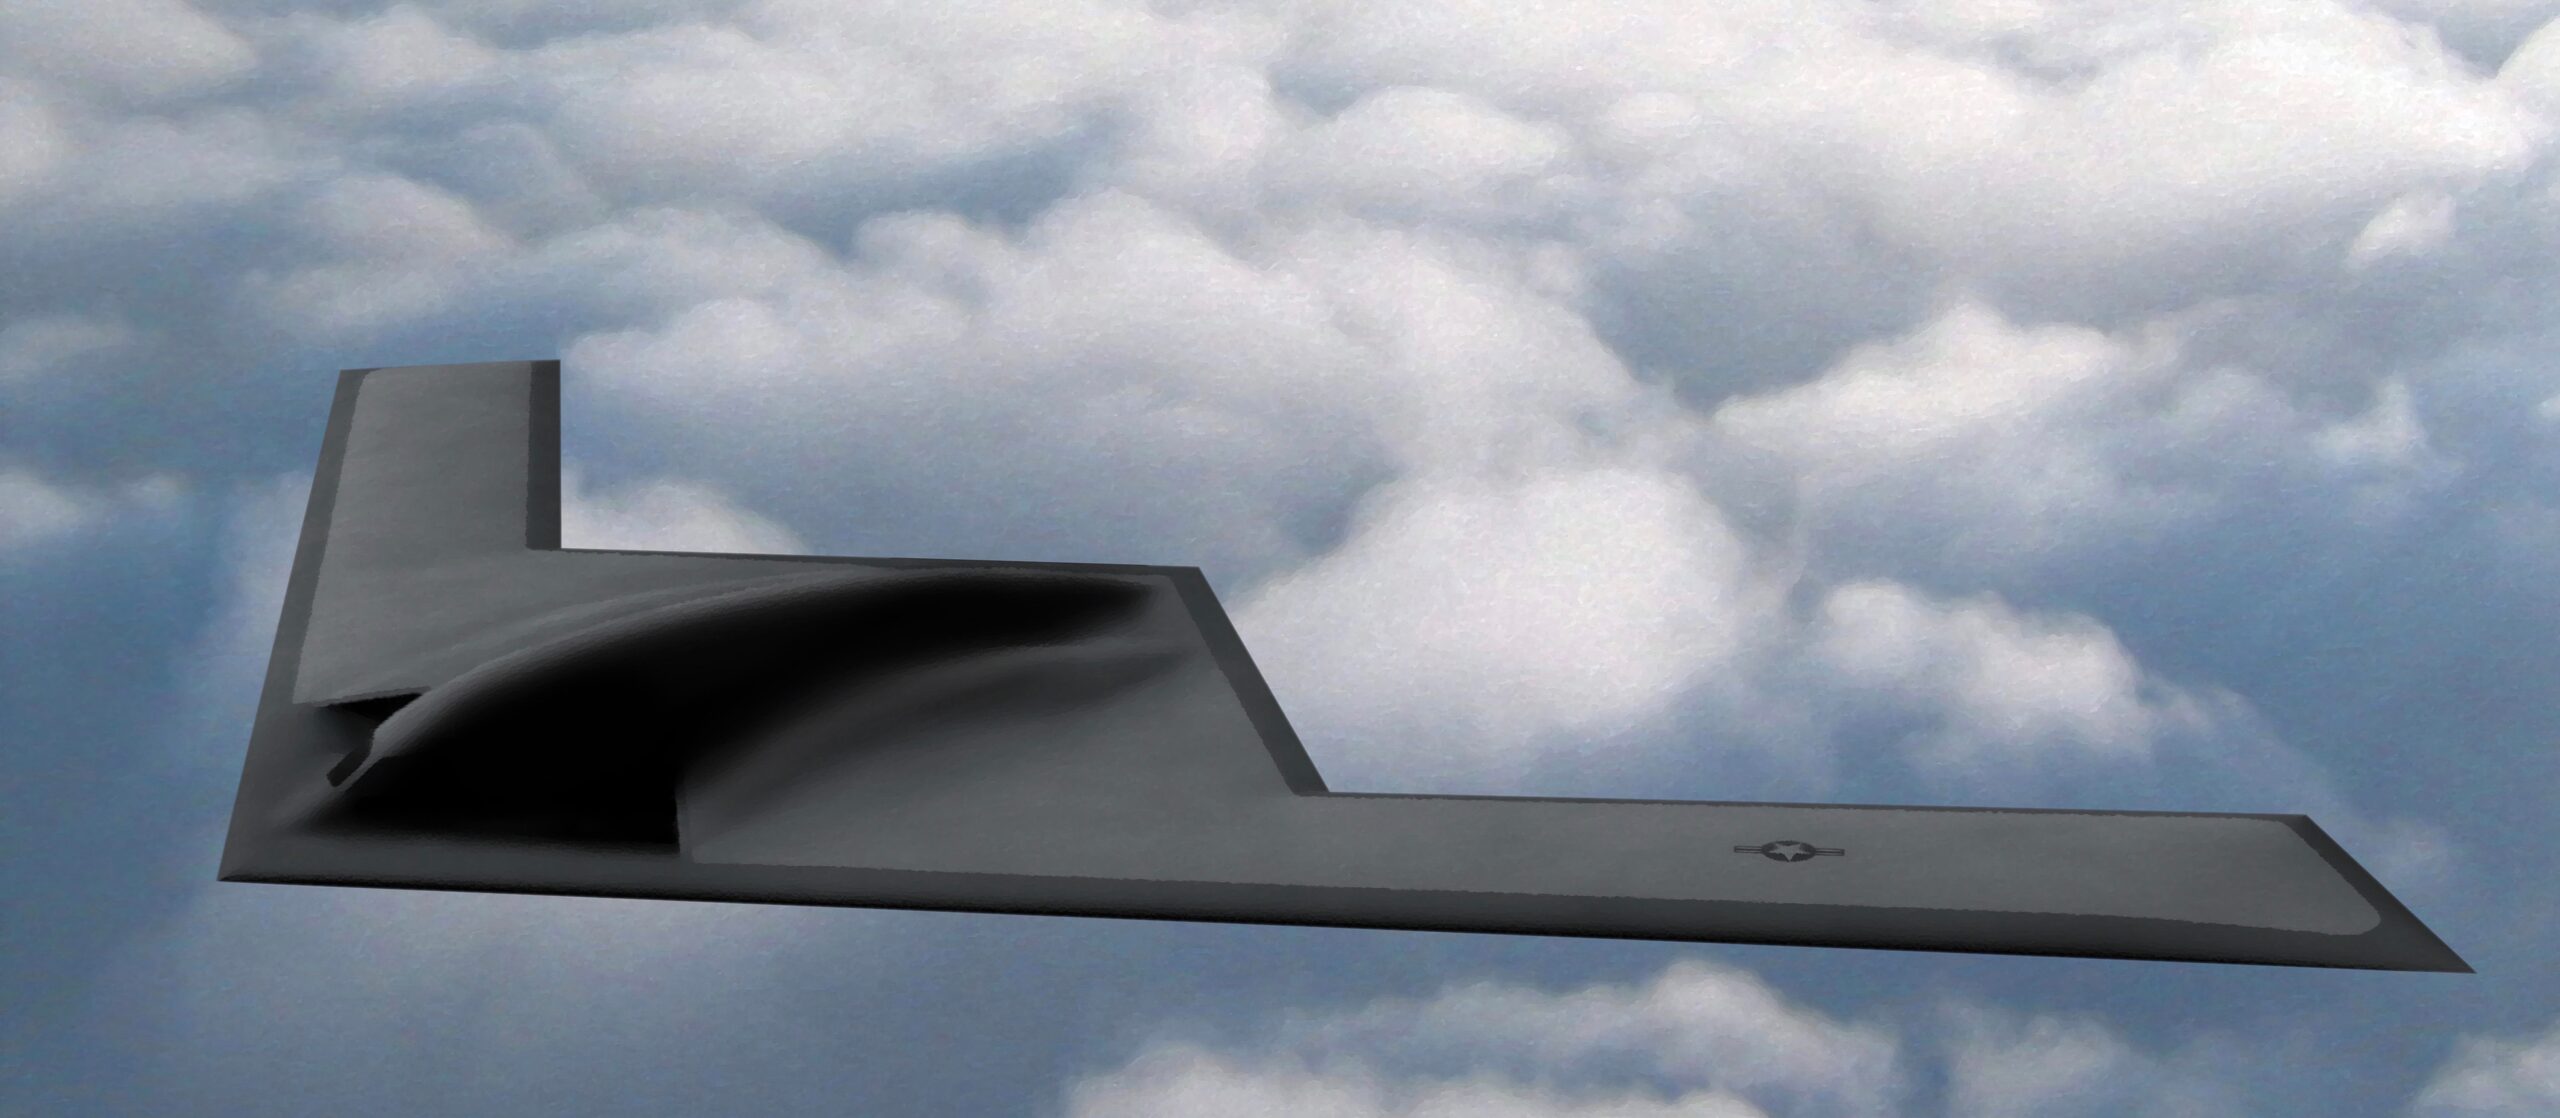 B-21 A Good News Story; DoD Acquisition ‘Getting Better:’ HASC Chair